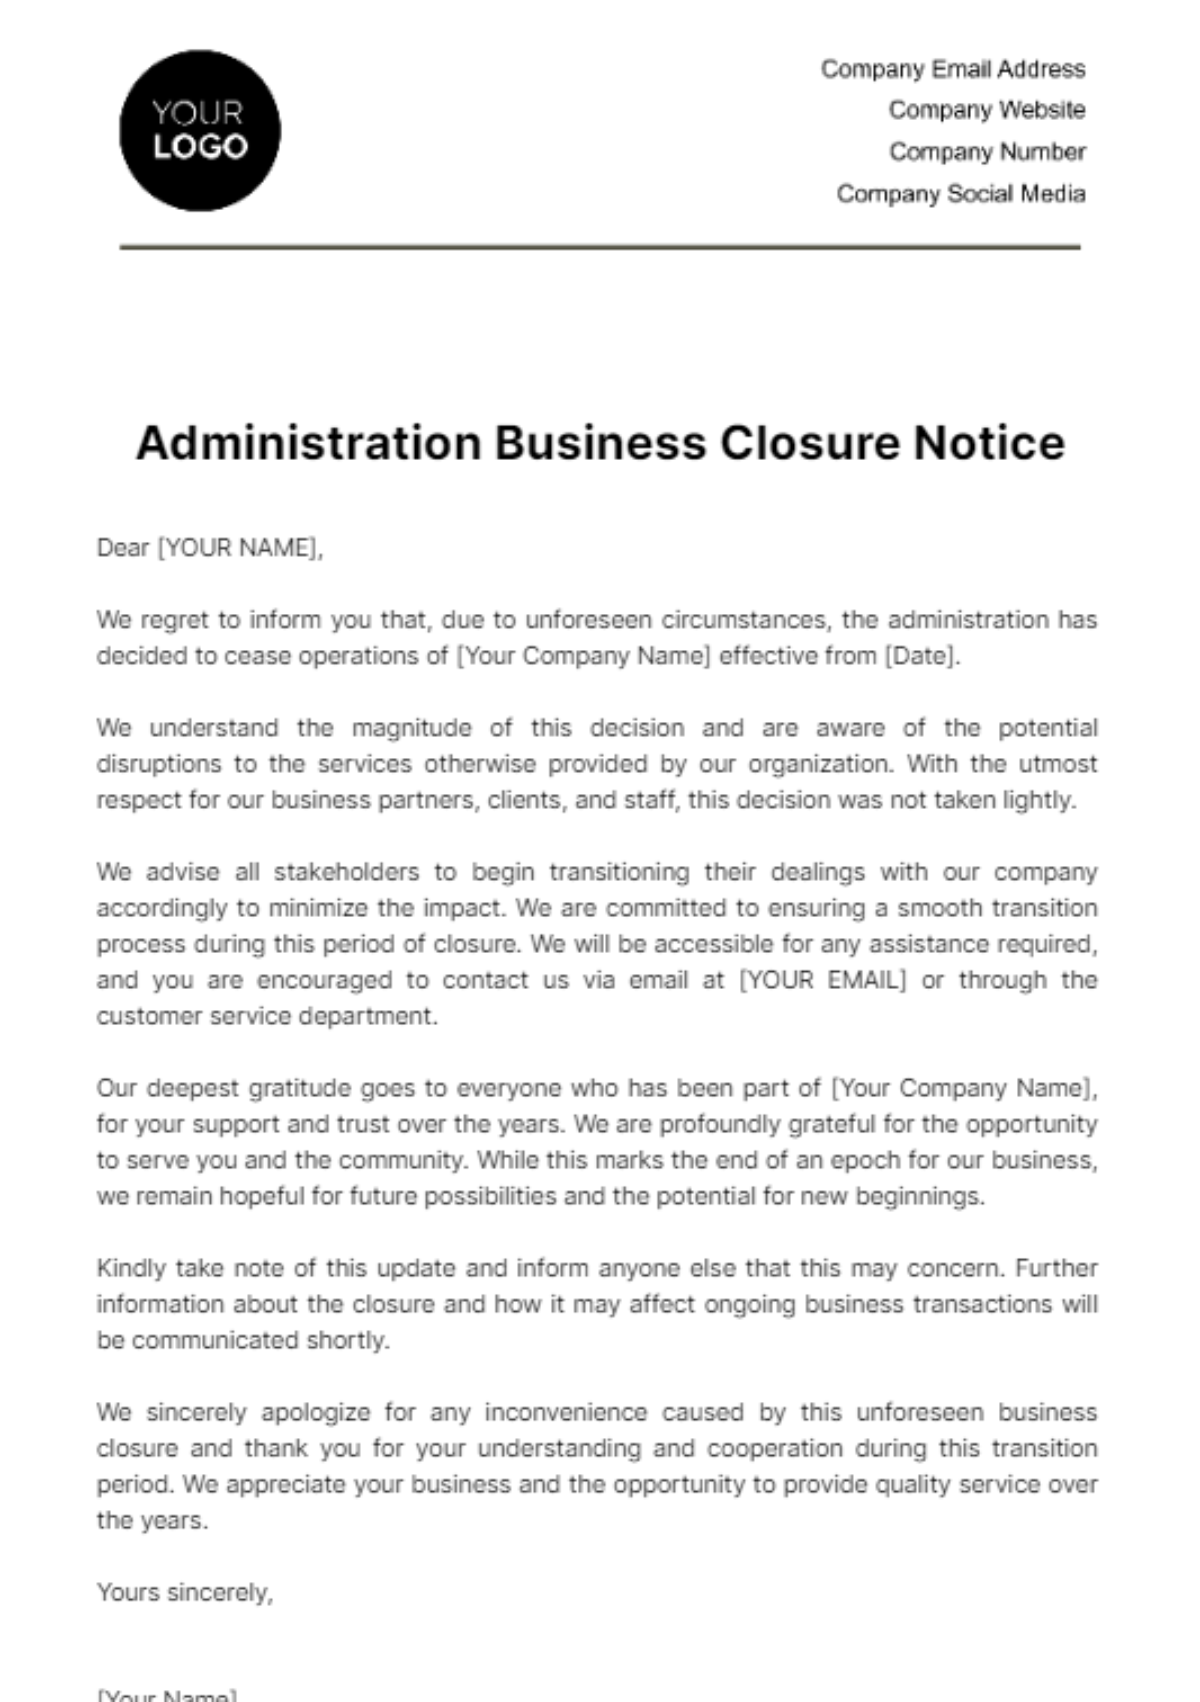 Free Administration Business Closure Notice Template